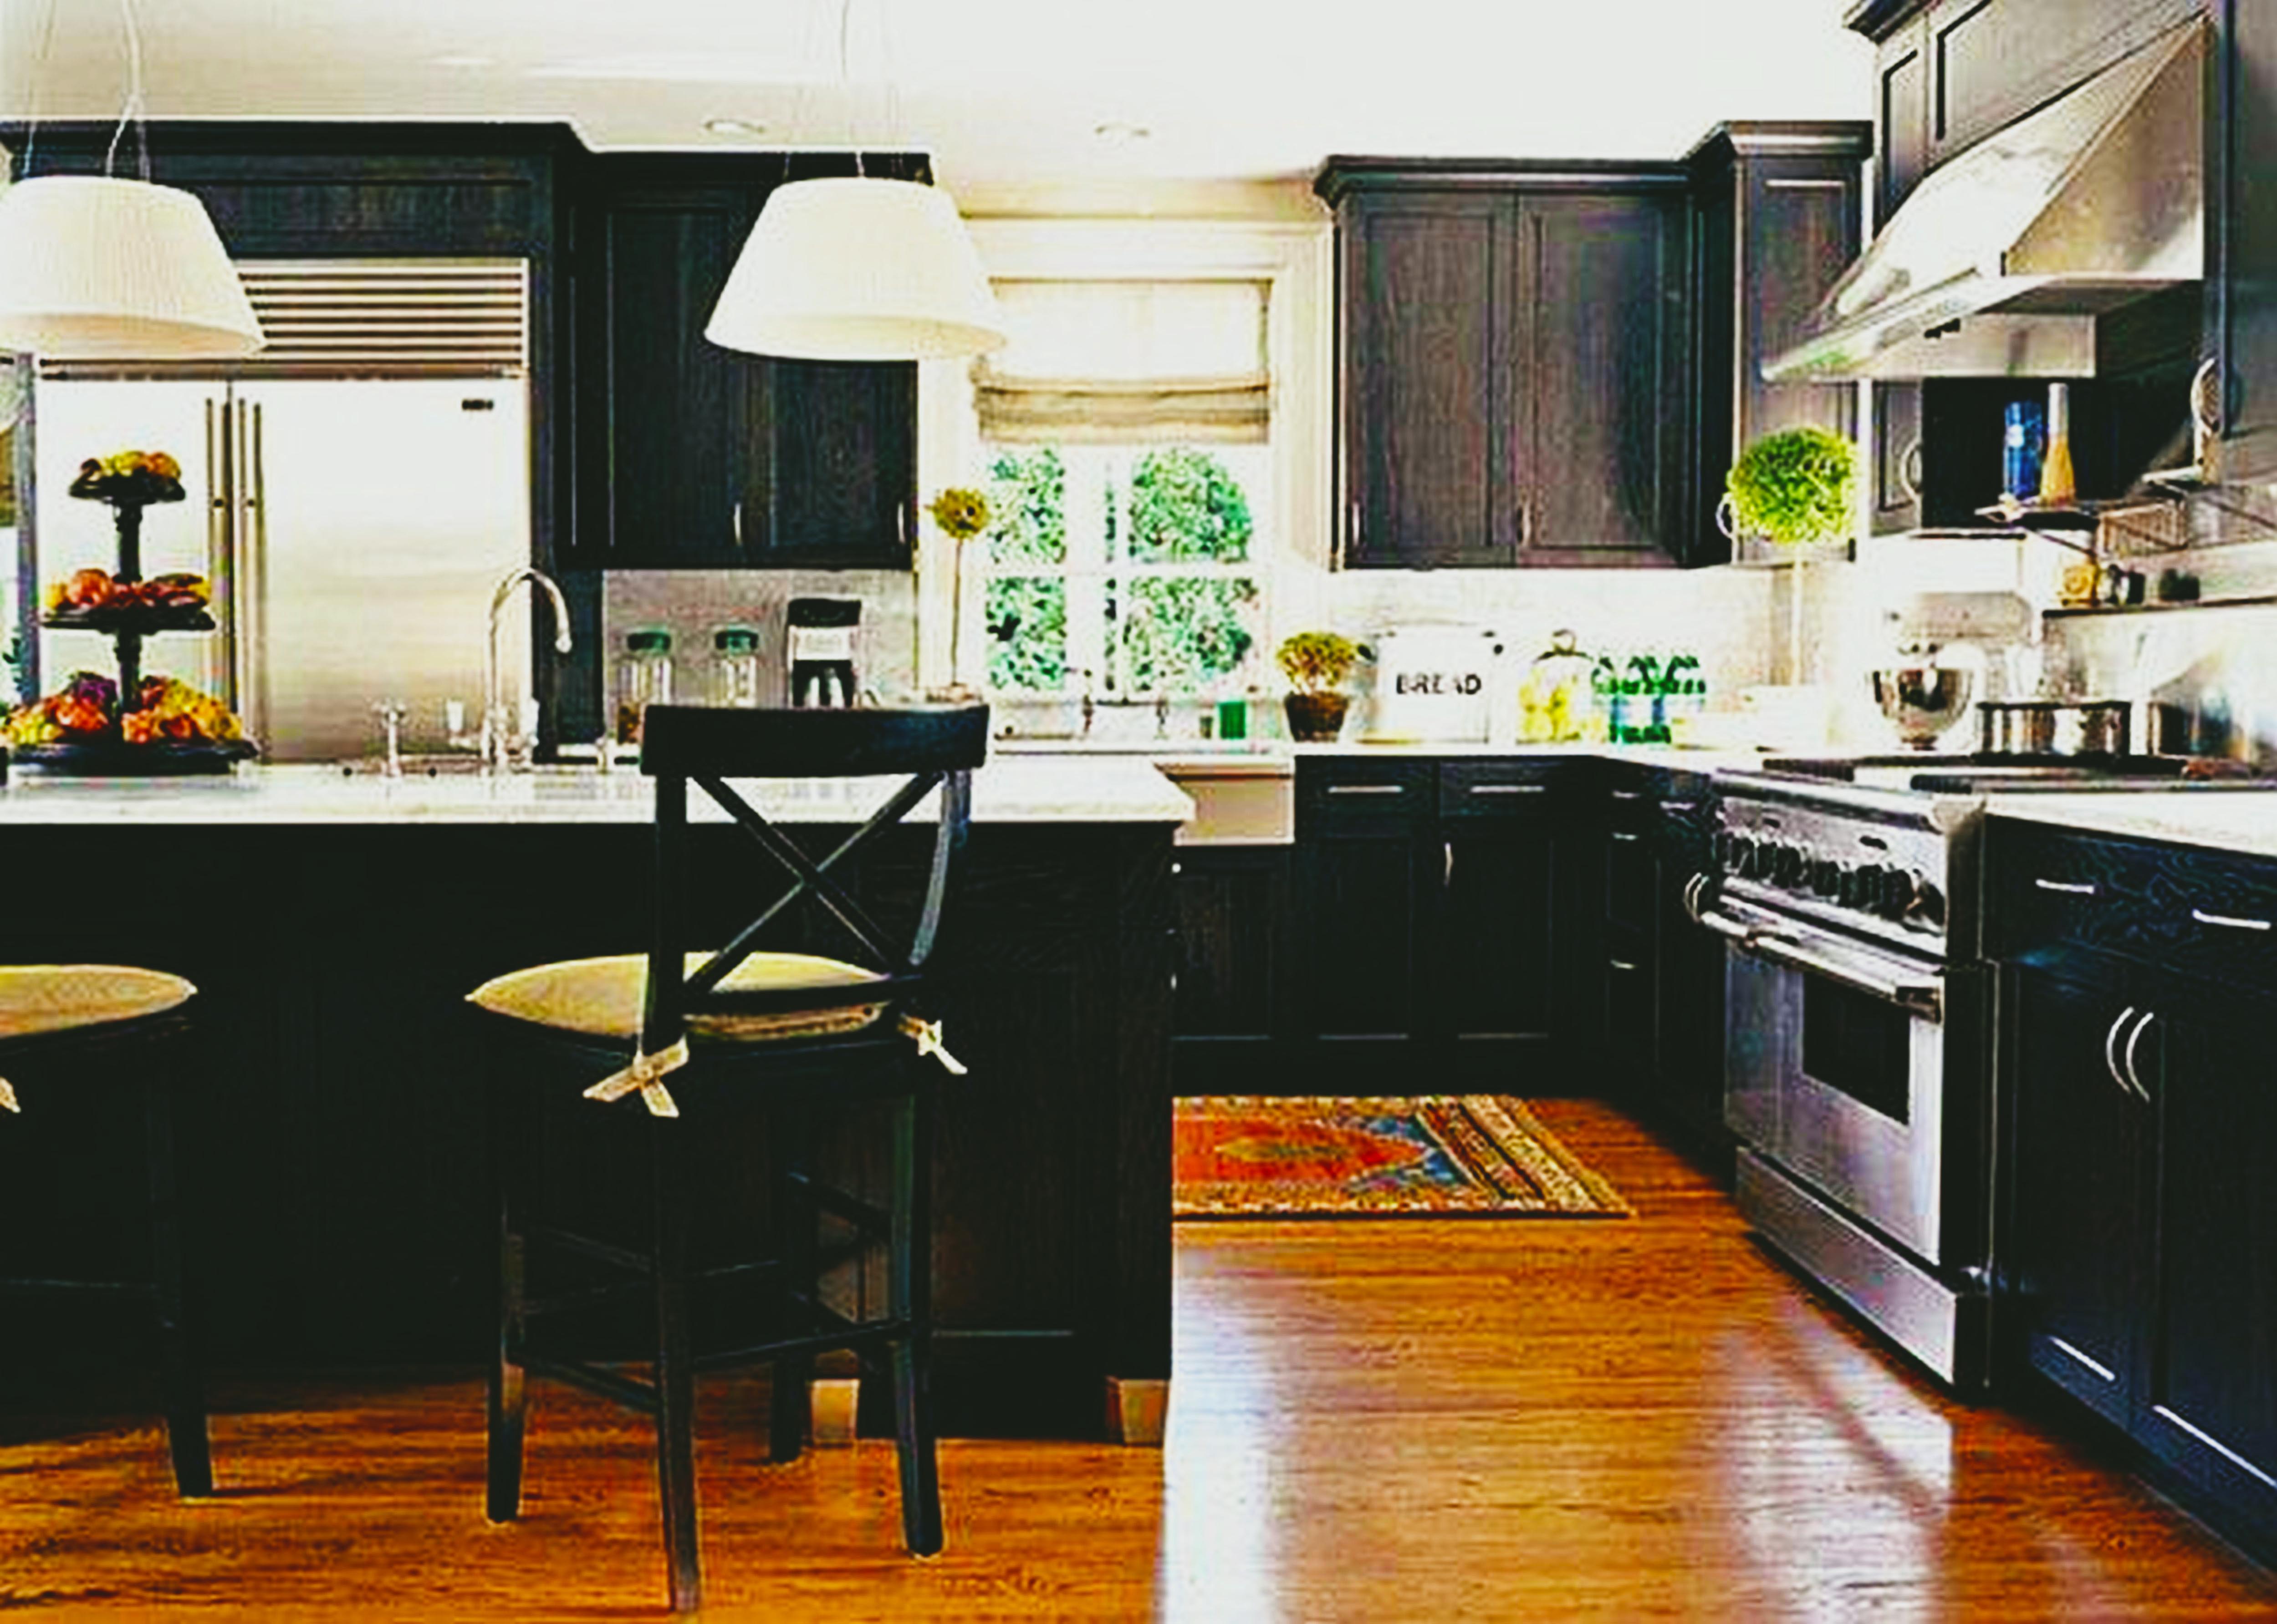 black-kitchen-cabinets-doors-refacing-ideas-with-quartz-countertops-island-and-aluminium-kitchen-sink-for-modern-shaker-kitchen-cabinets